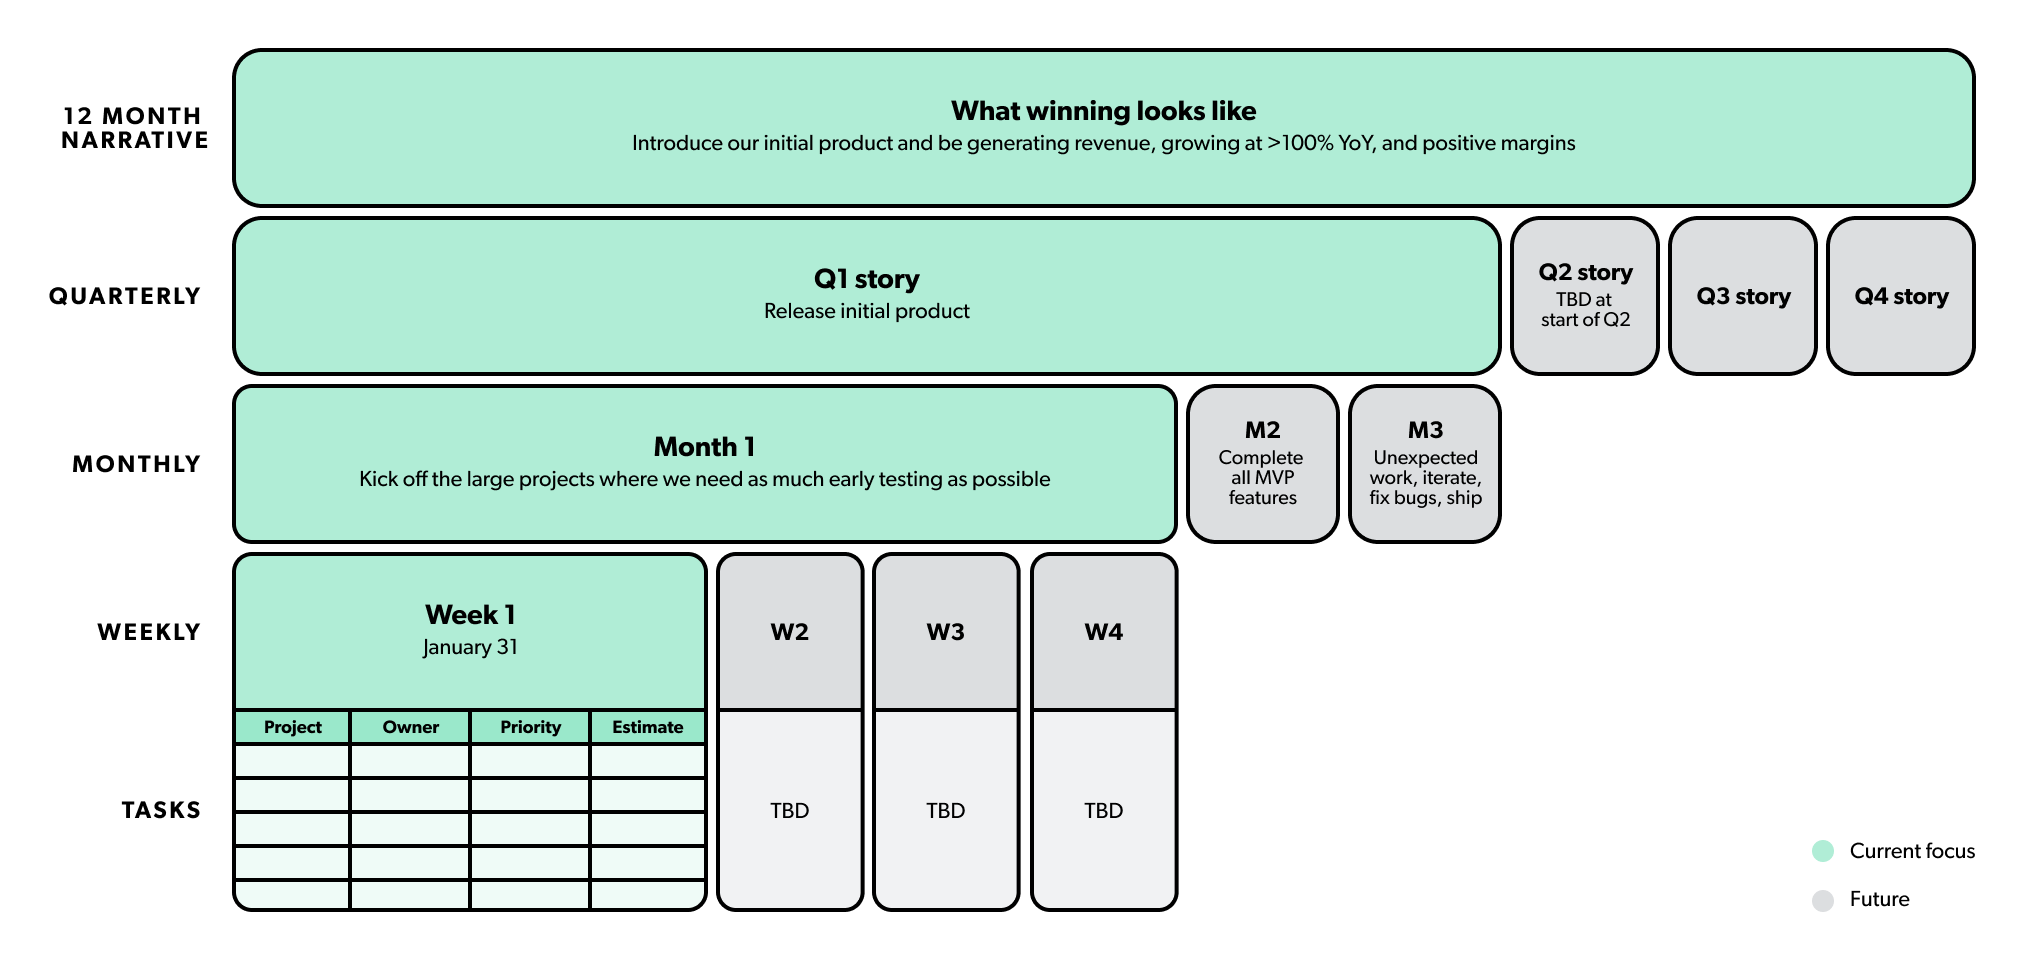 Template for planning by narrative, with blocks for 12 month narrative, quarterly theme, monthly objective and weekly plans